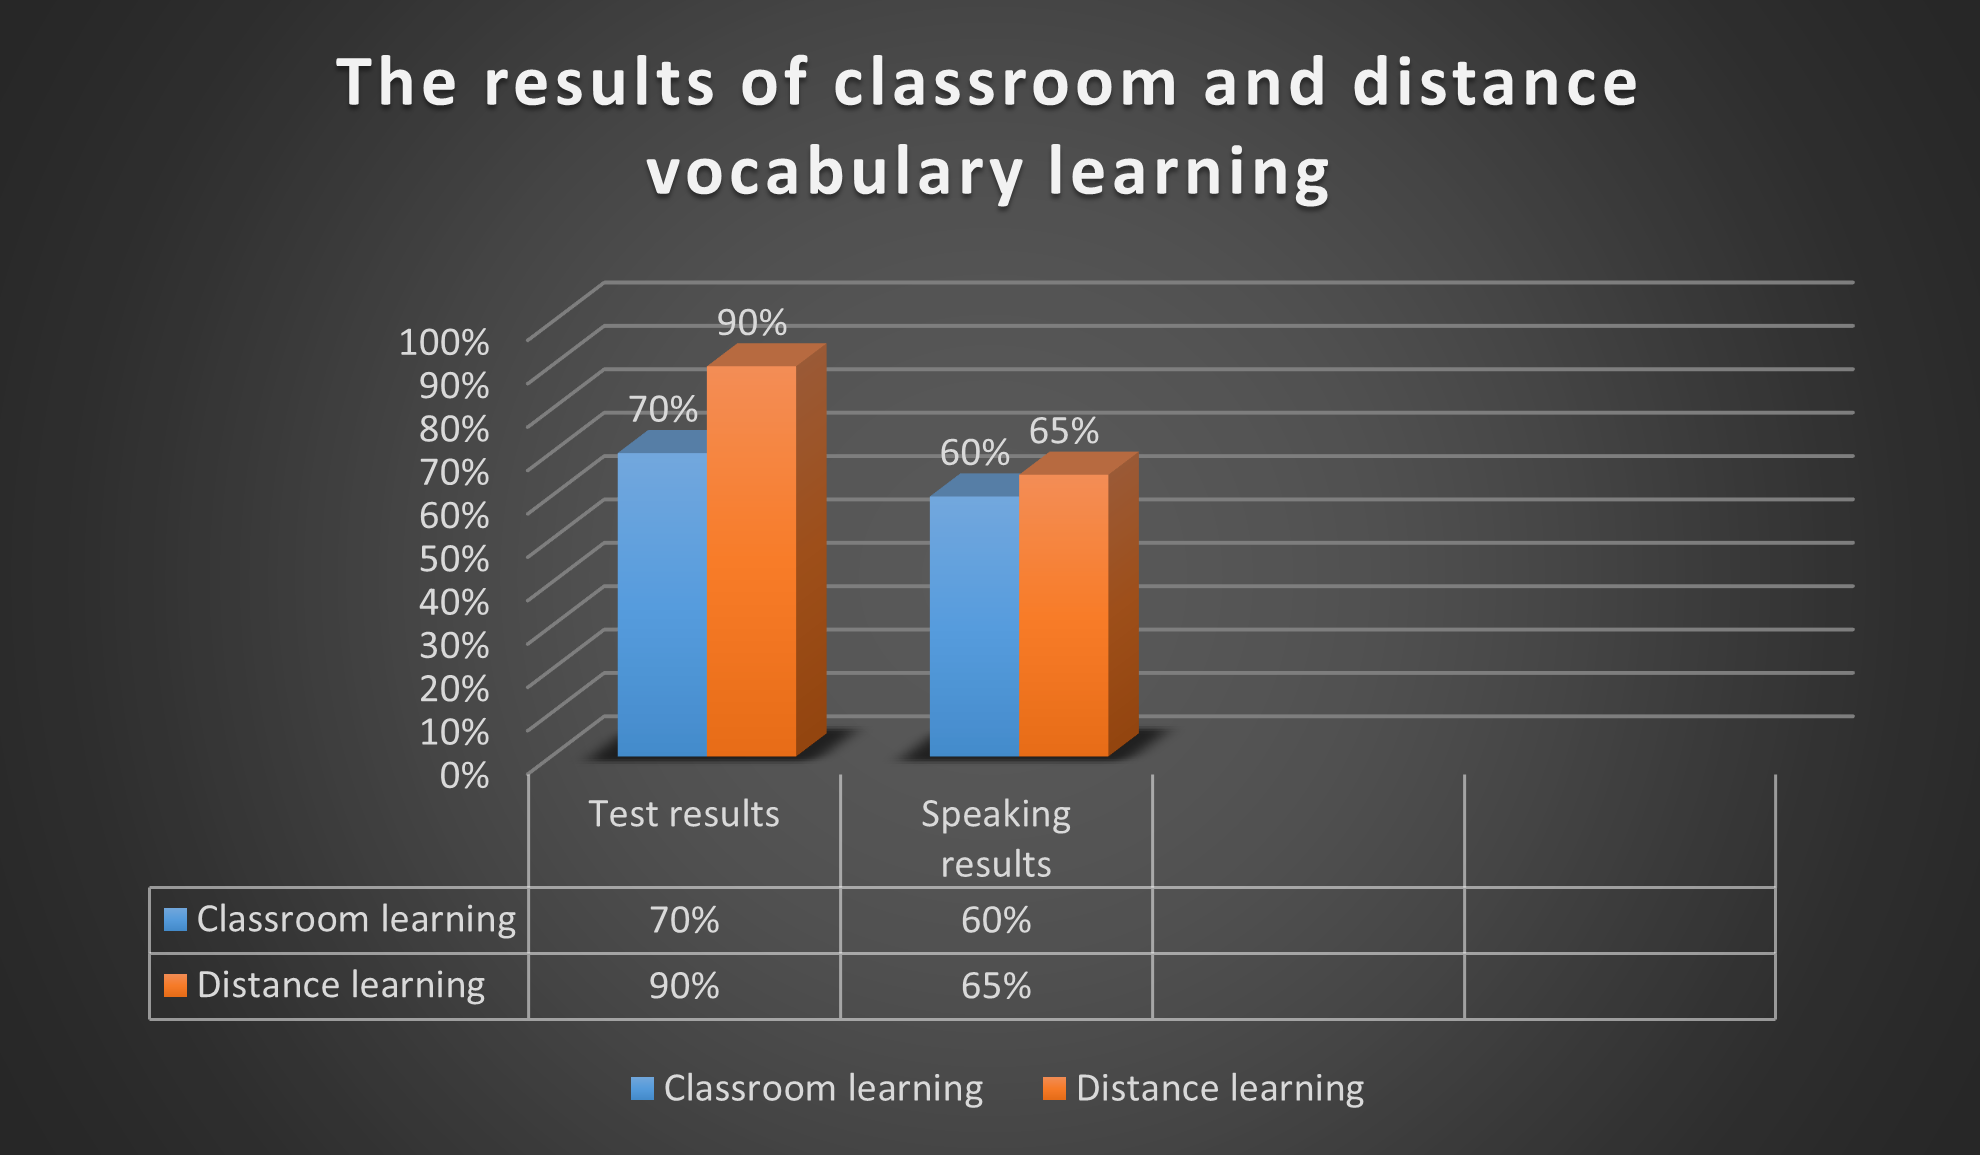 The results of the level of topic-related vocabulary knowledge